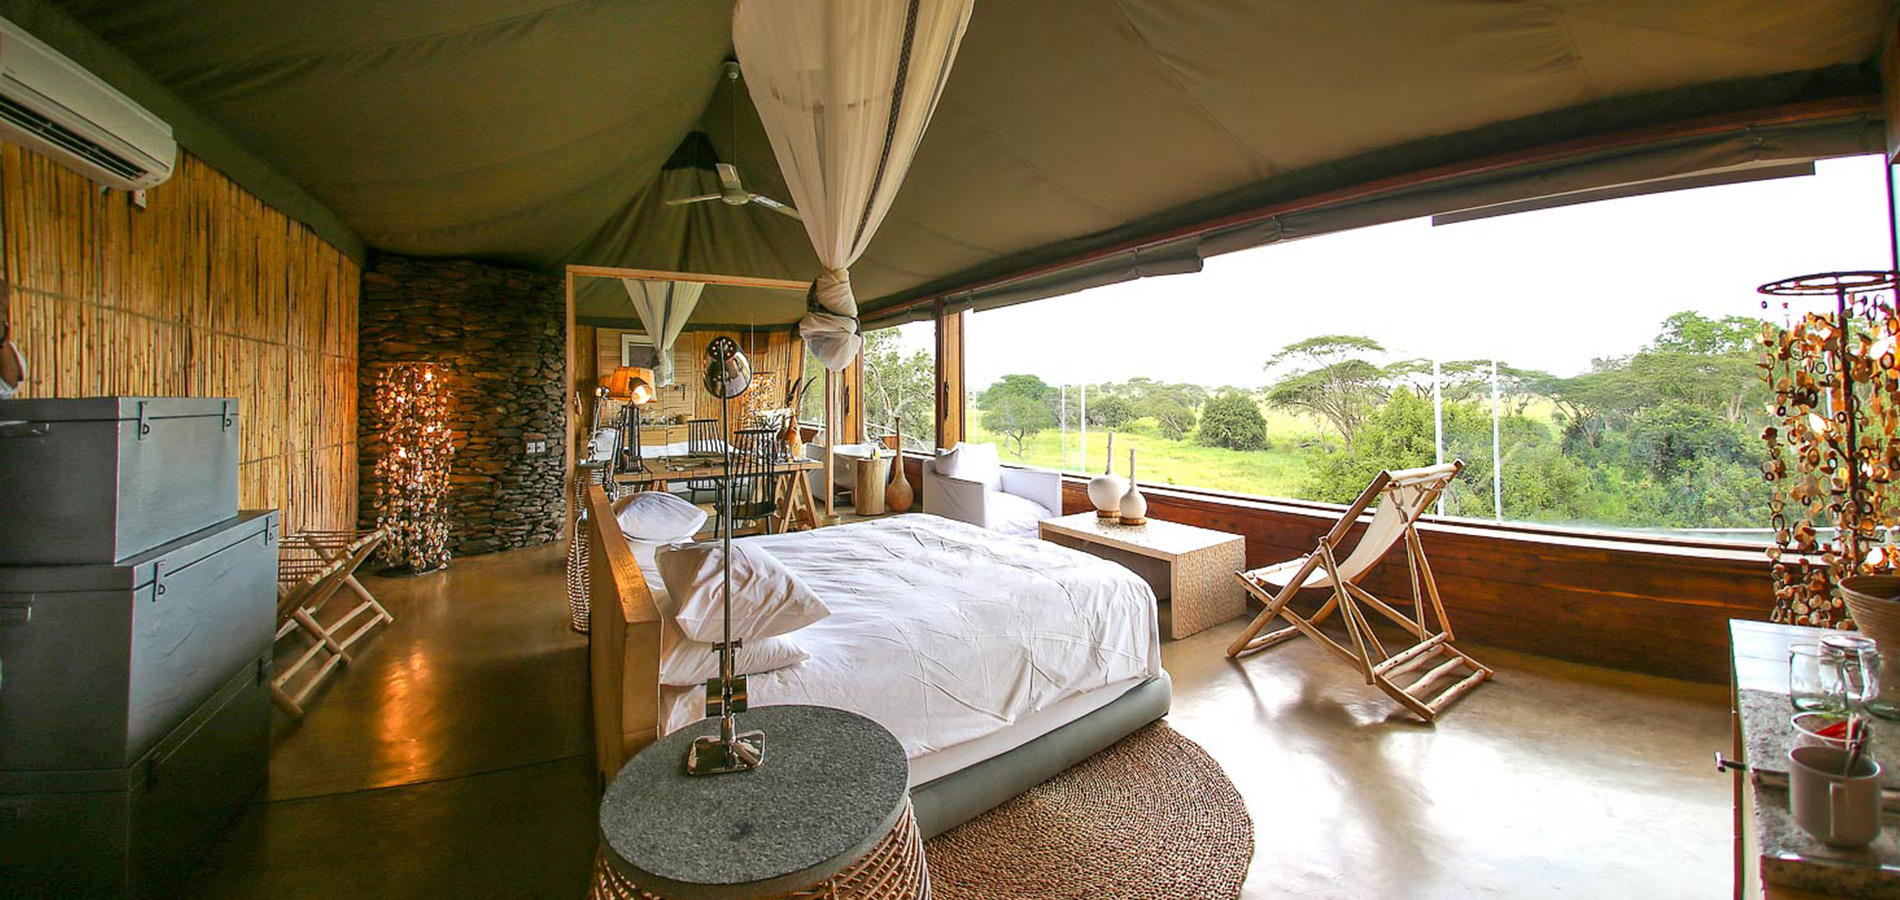 Enjoy at the Luxury Accommodation in Serengeti at Singita Faru Faru Camp Tanzania serengeti african safari Accommodation, luxury Singita Faru Faru Camp Tanzania, tanzania luxury safari, in Serengeti safari tour the most luxurious safari lodge in tanzania it features just nine suites that are traditionally designed and with Danish-inspired interiors, giving the lodge Tanzania a feeling of intimacy and exclusivity for guests lucky enough to stay in Tanzania holidays packages